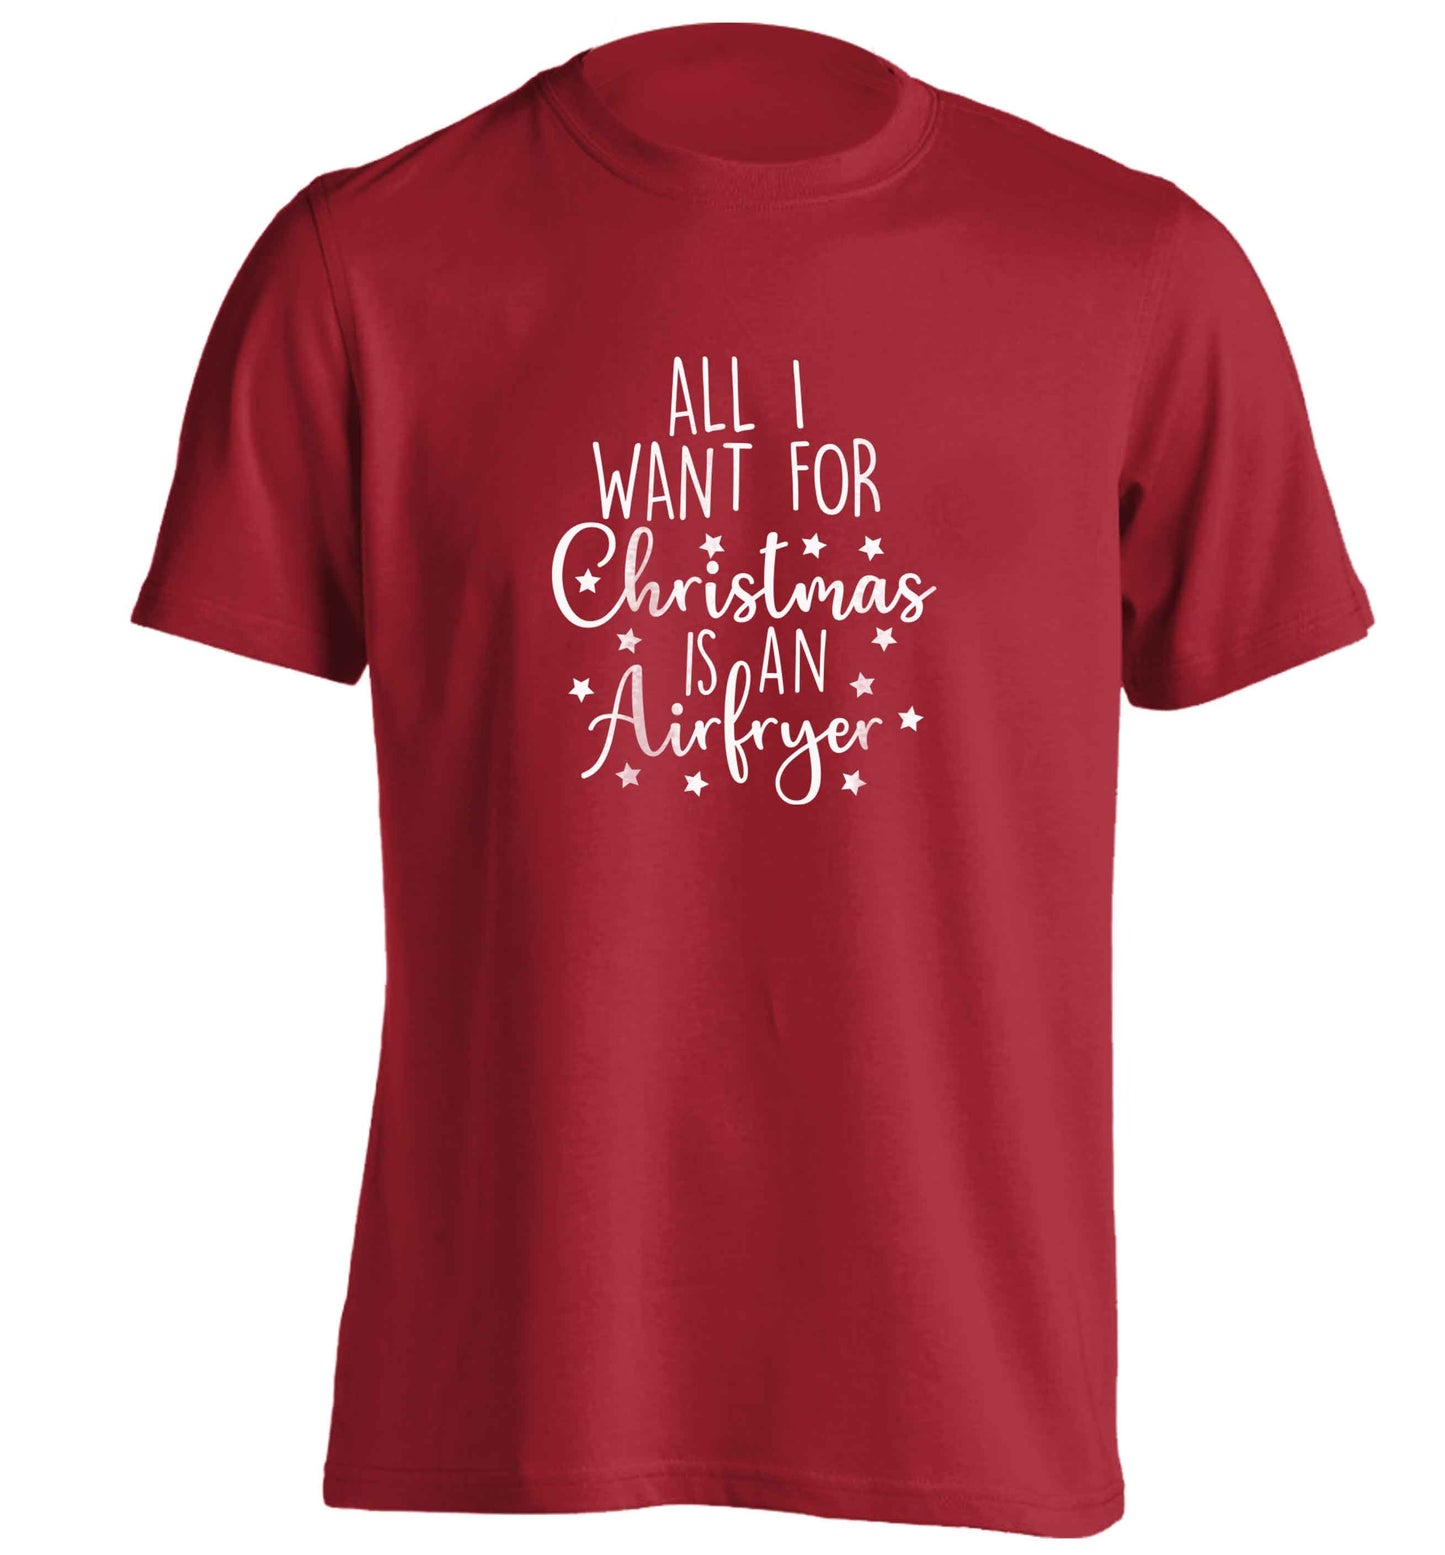 All I want for Christmas is an airfryeradults unisex red Tshirt 2XL